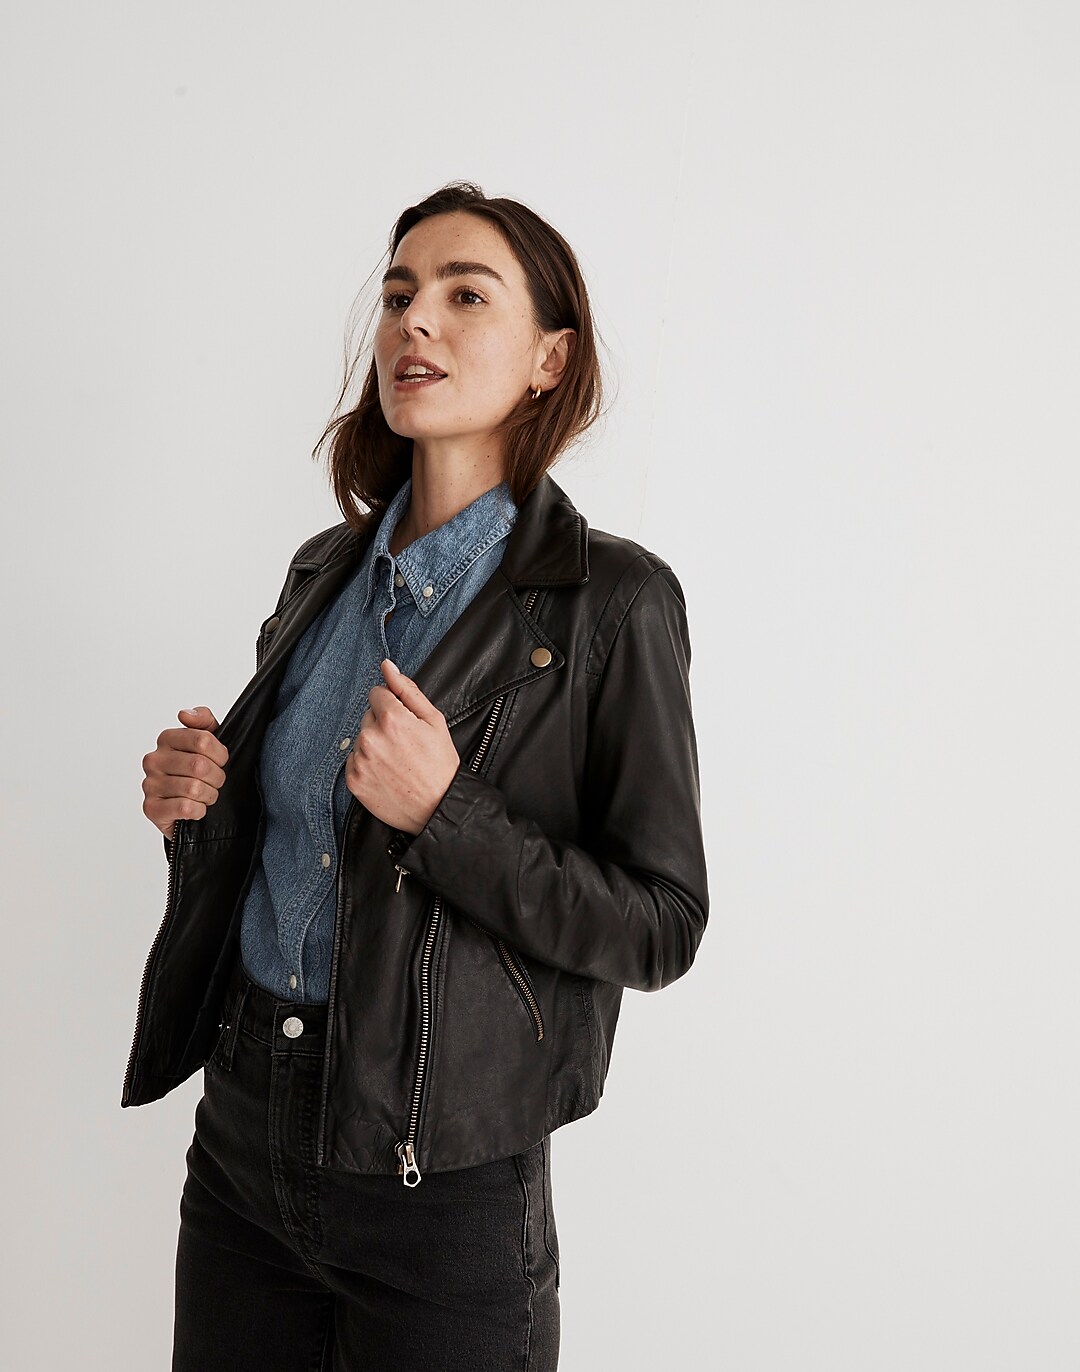 Madewell Women's Washed Leather Motorcycle Jacket: Brass Hardware Edition in True Black - Size Xxs